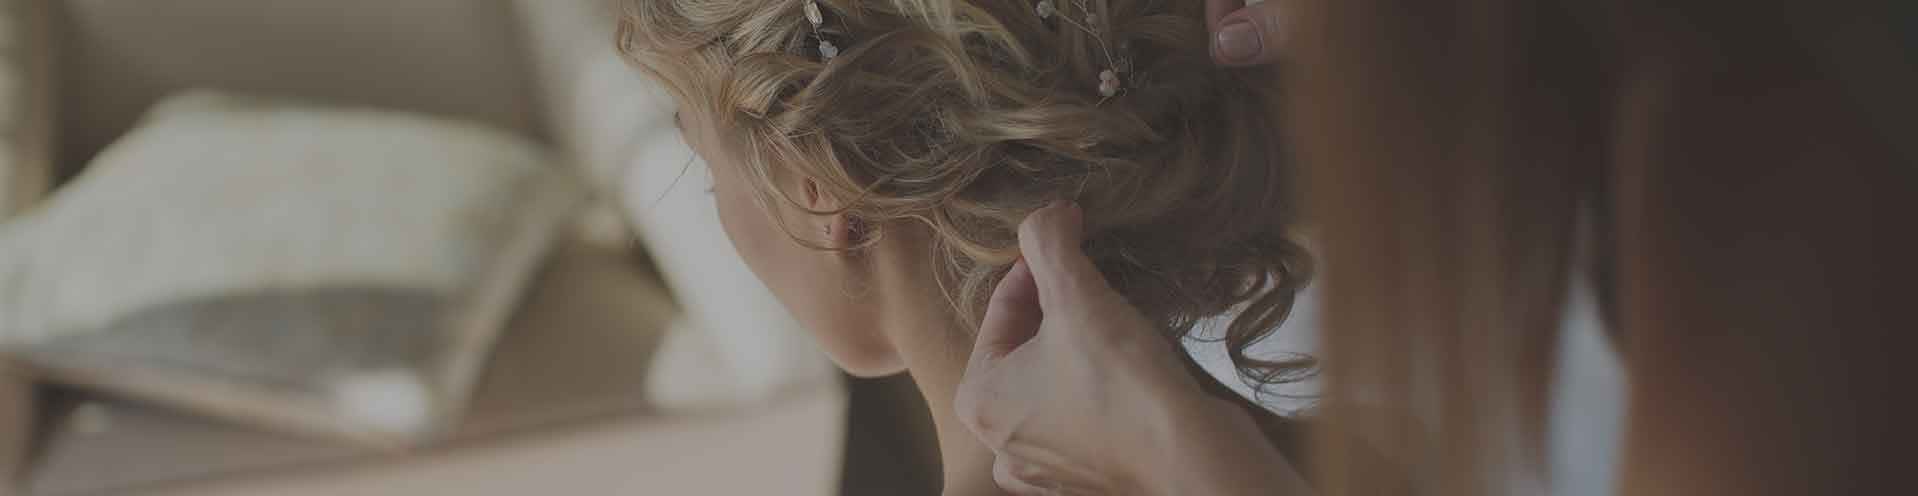 The 10 Best Wedding Hair Stylists in Brisbane, QLD - Oneflare